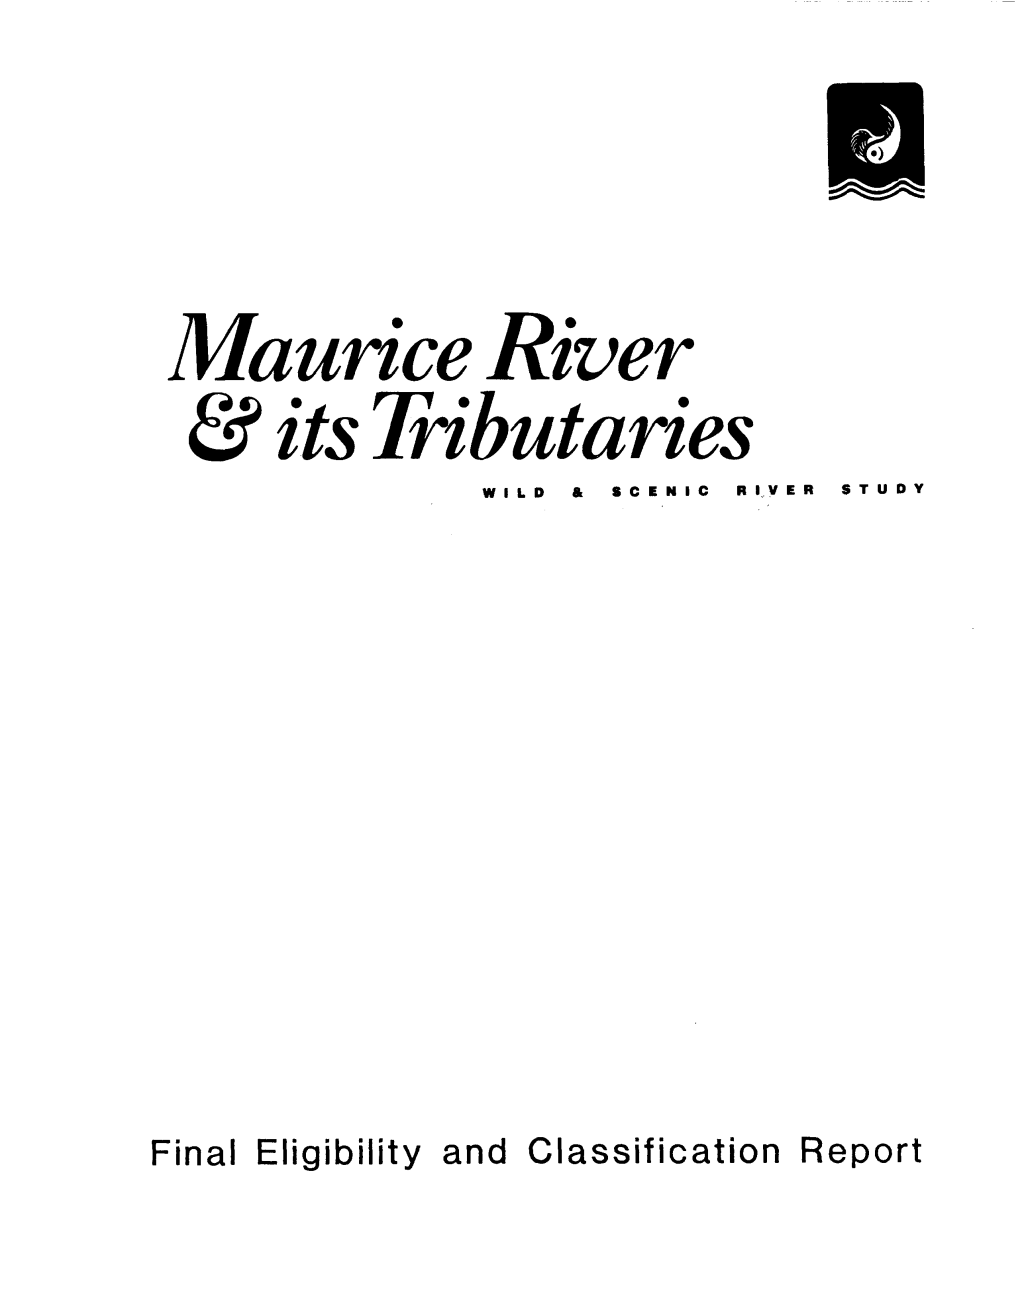 Maurice River & Its Tributaries